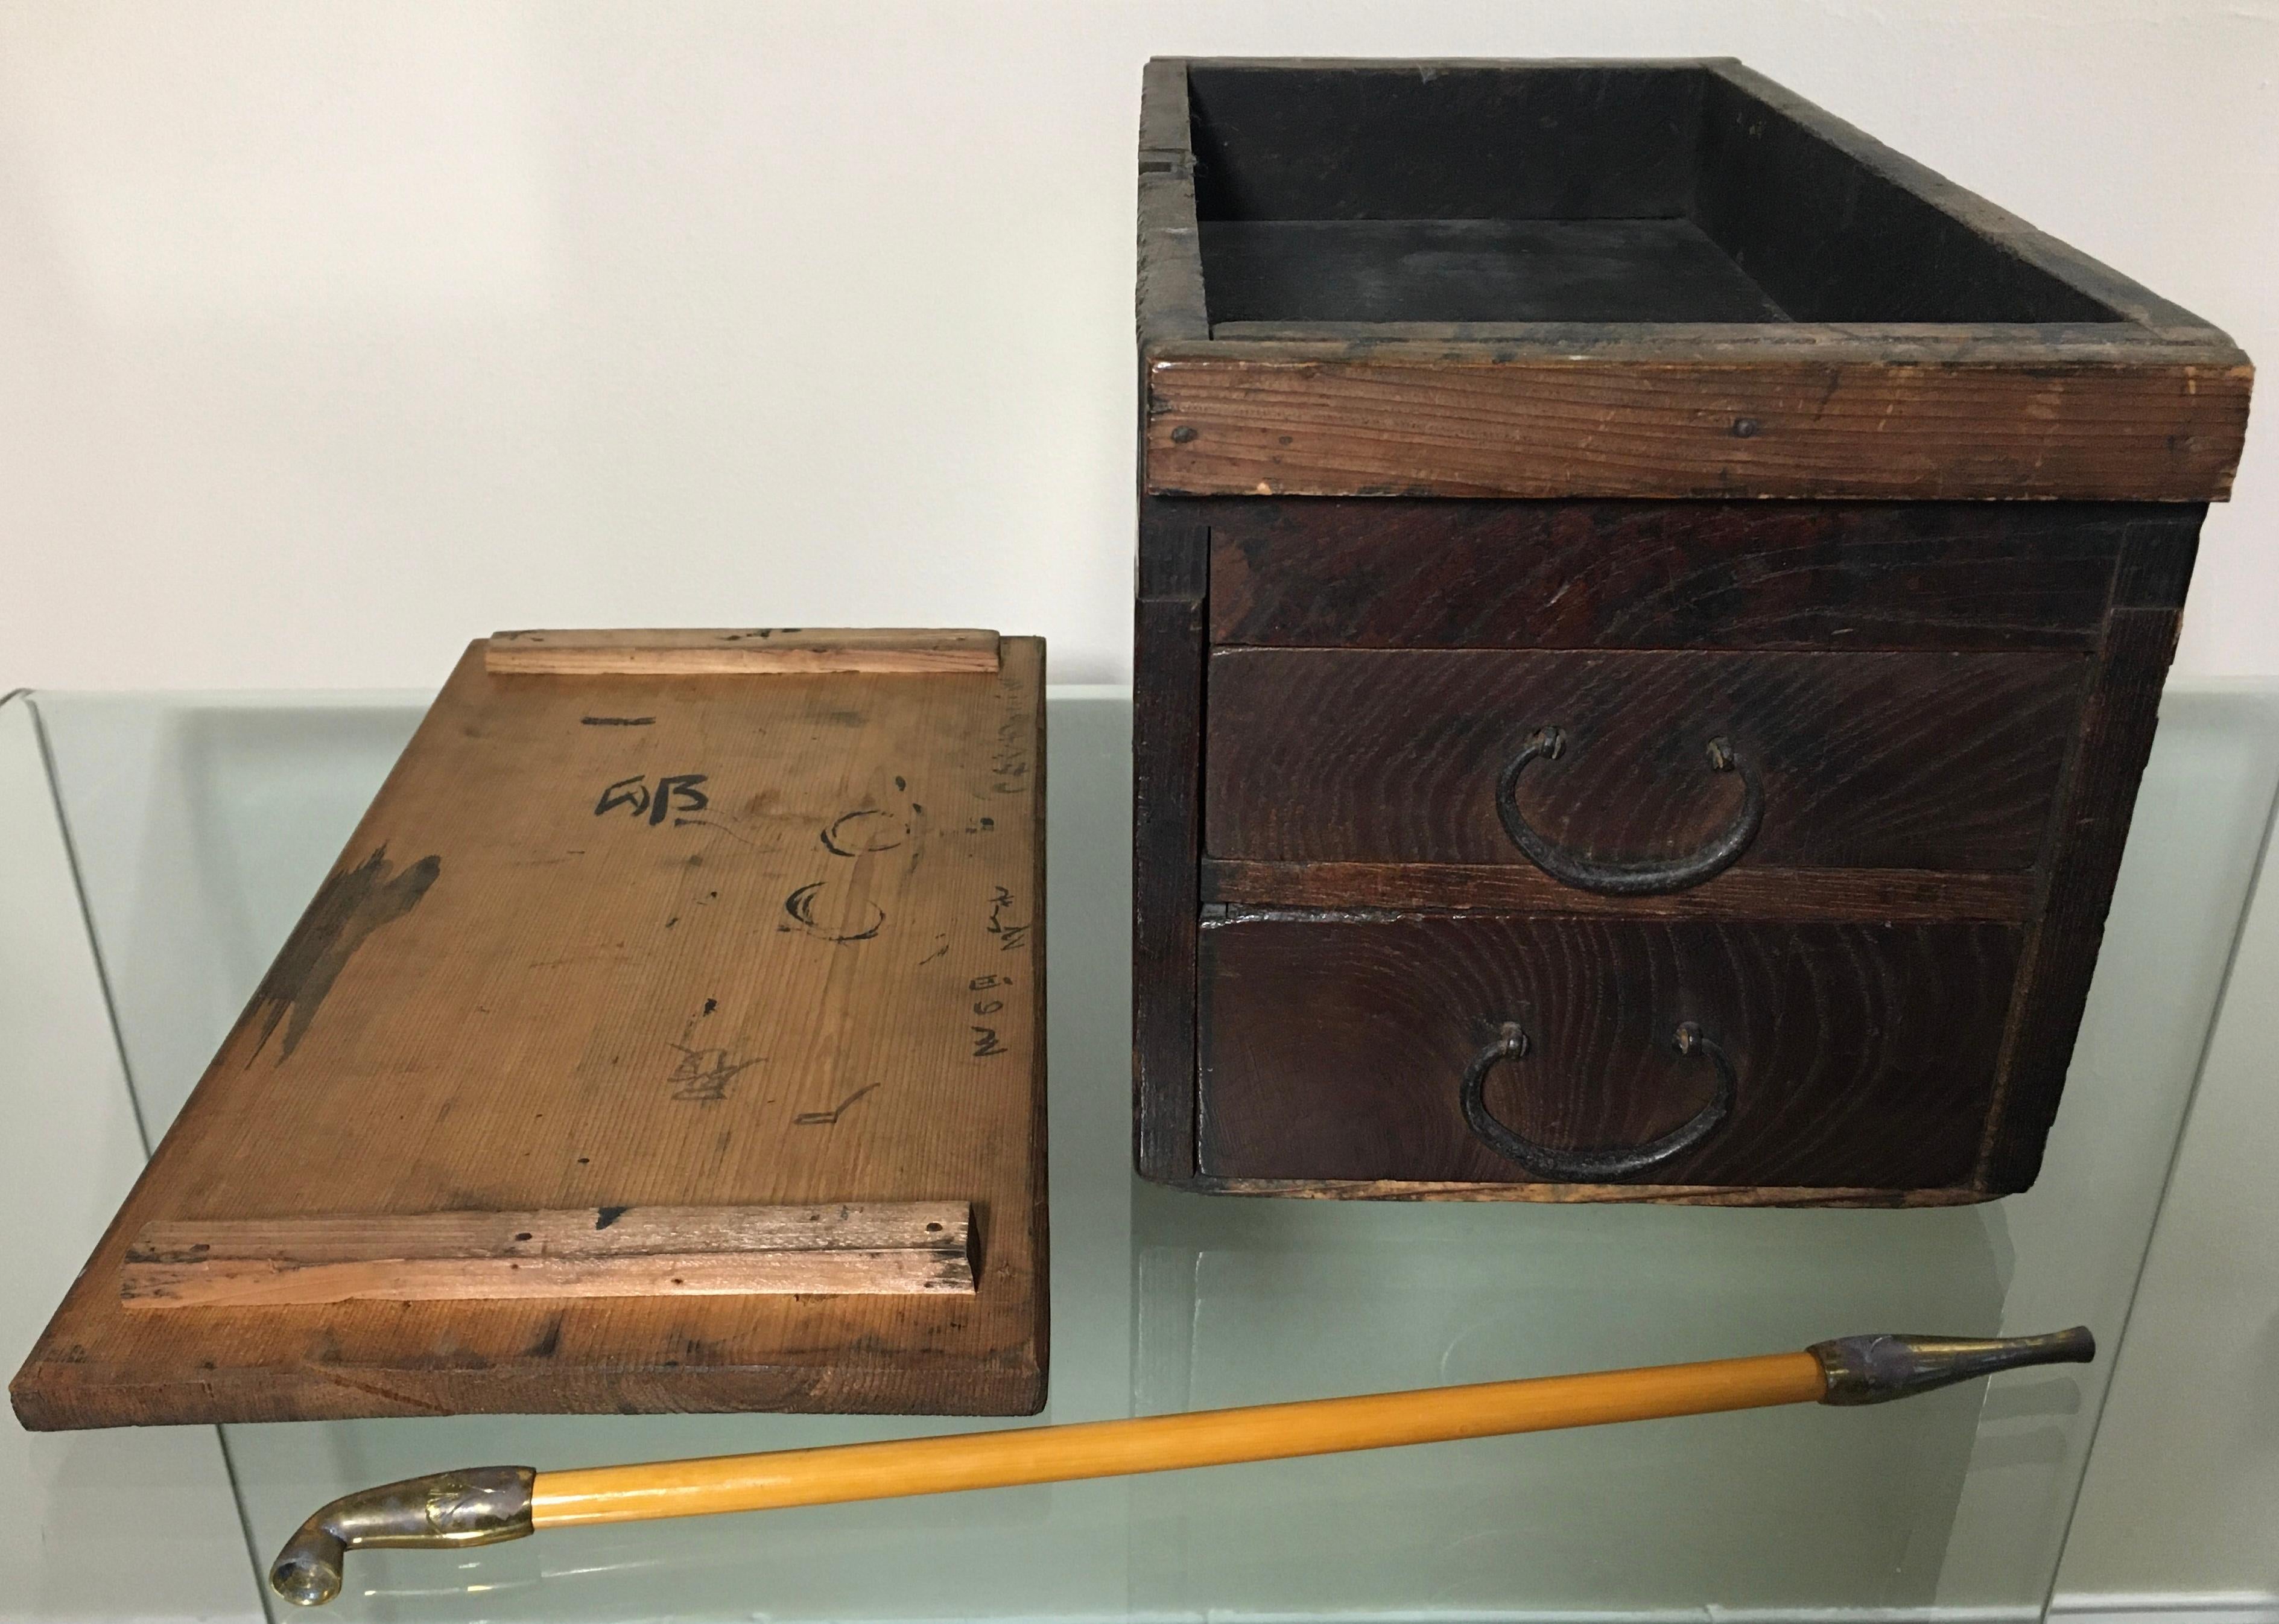 This antique Japanese Tobacco Box, complete with drawers, a kiseru, is a captivating piece of history. The warm hew of the elm is telling a story of time.
The box showcases authentic metal fittings that narrate the rich journey of being well-loved